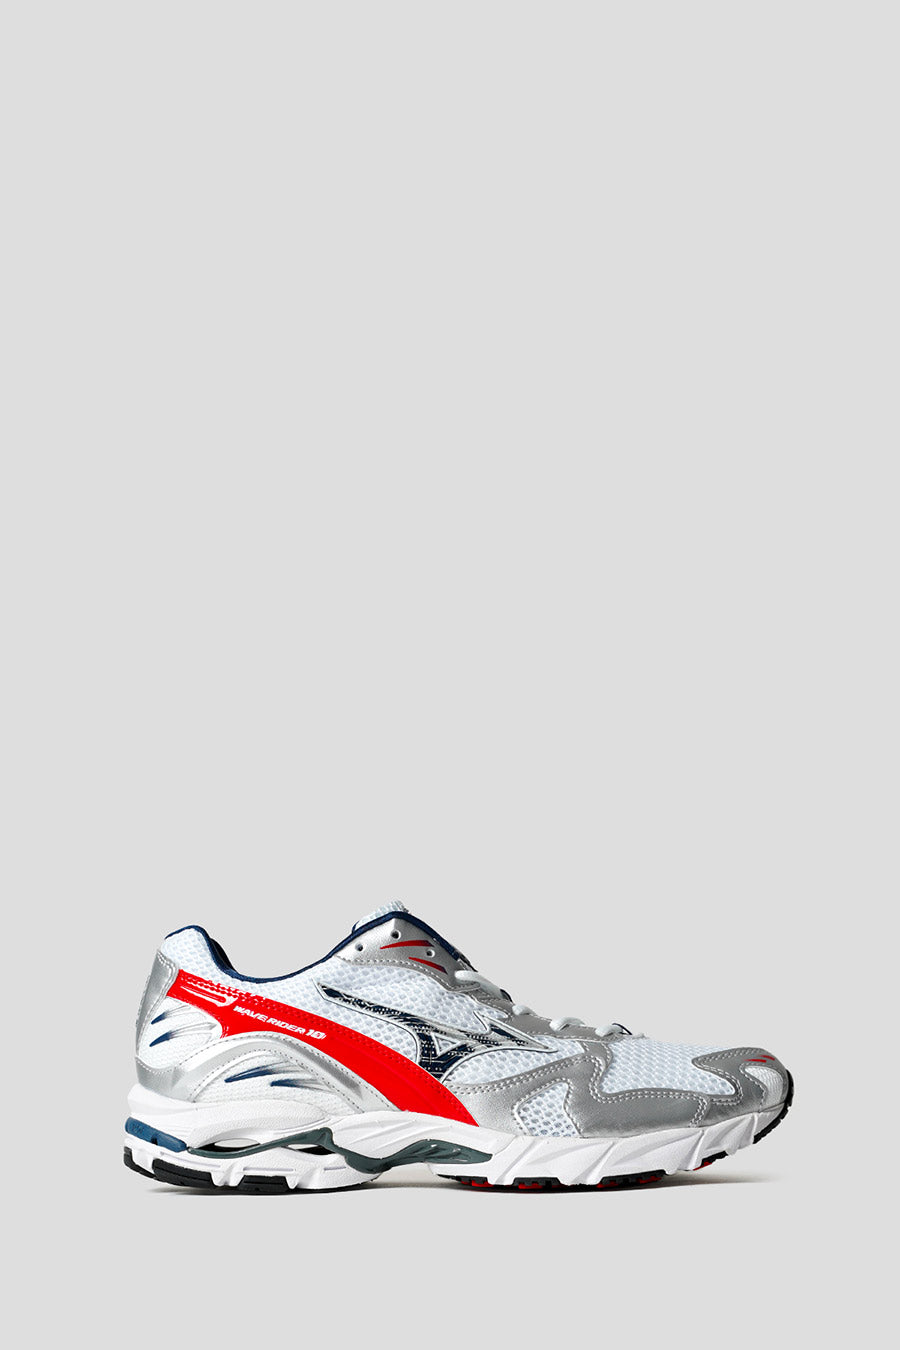 Wave Rider 10 - White, RB-Line Shoes